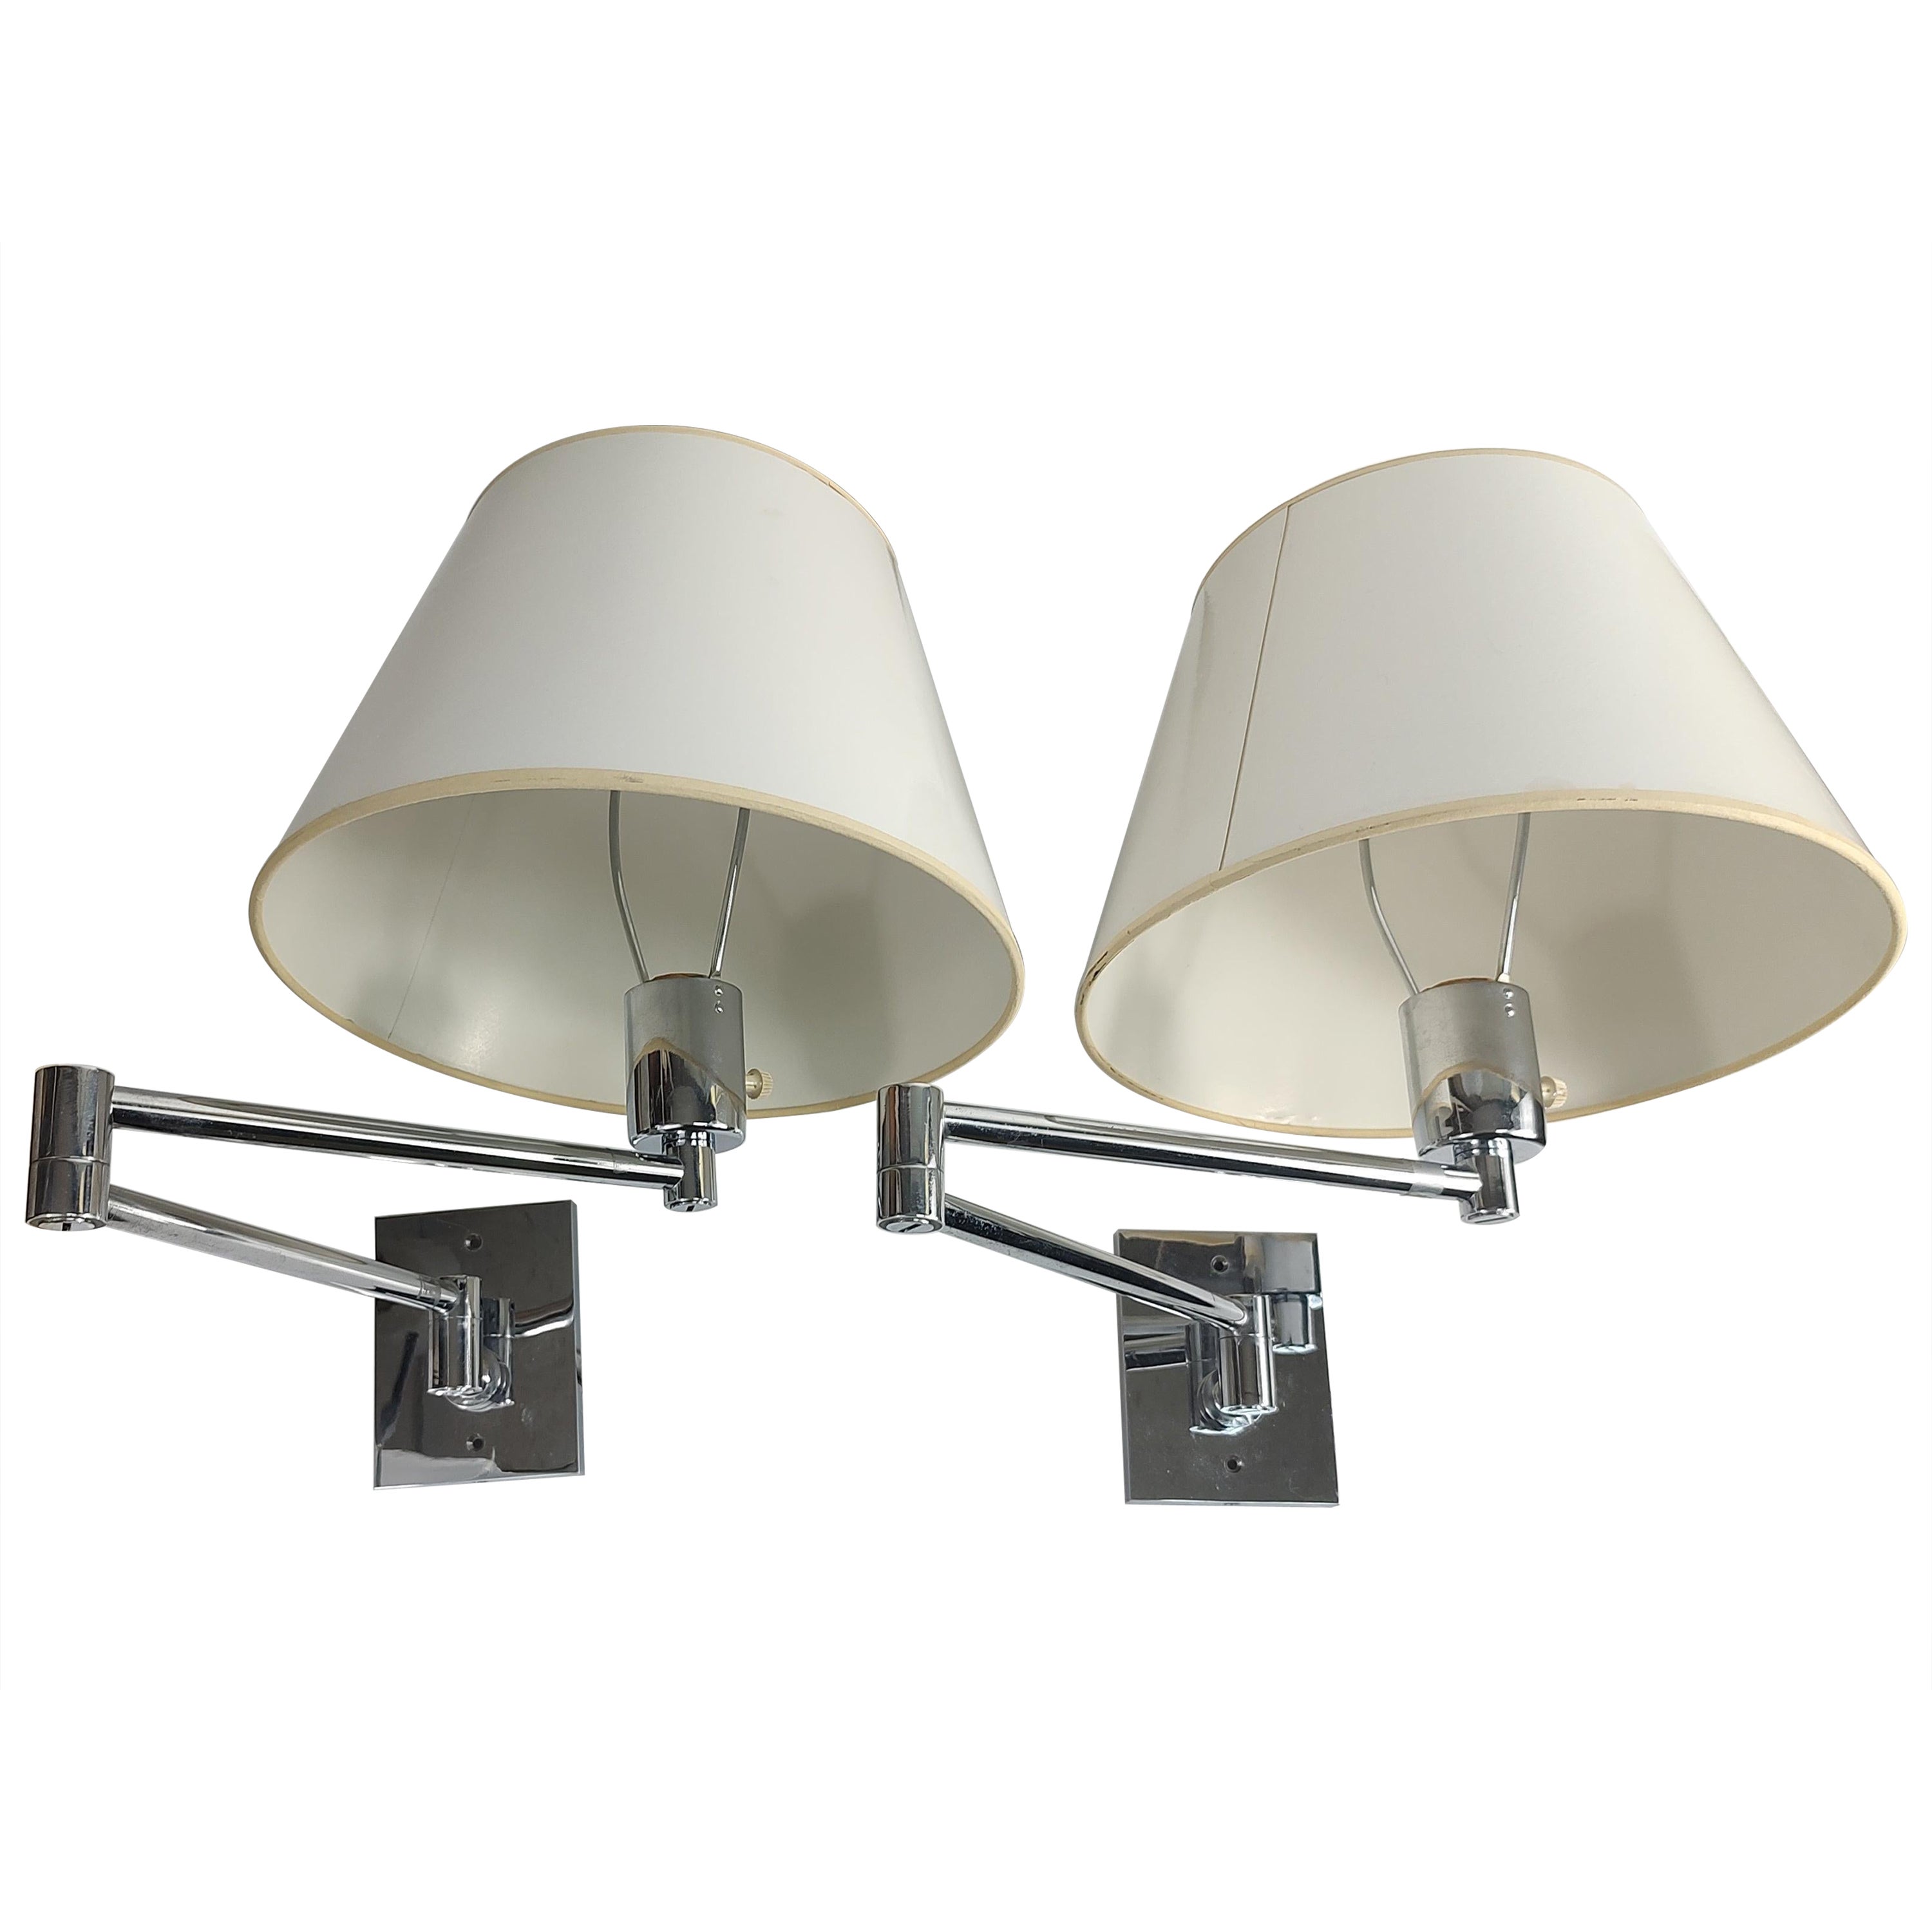 Pair of Mid Century Modern Chrome Swing Arm Wall Sconces By Hansen Lighting Co.